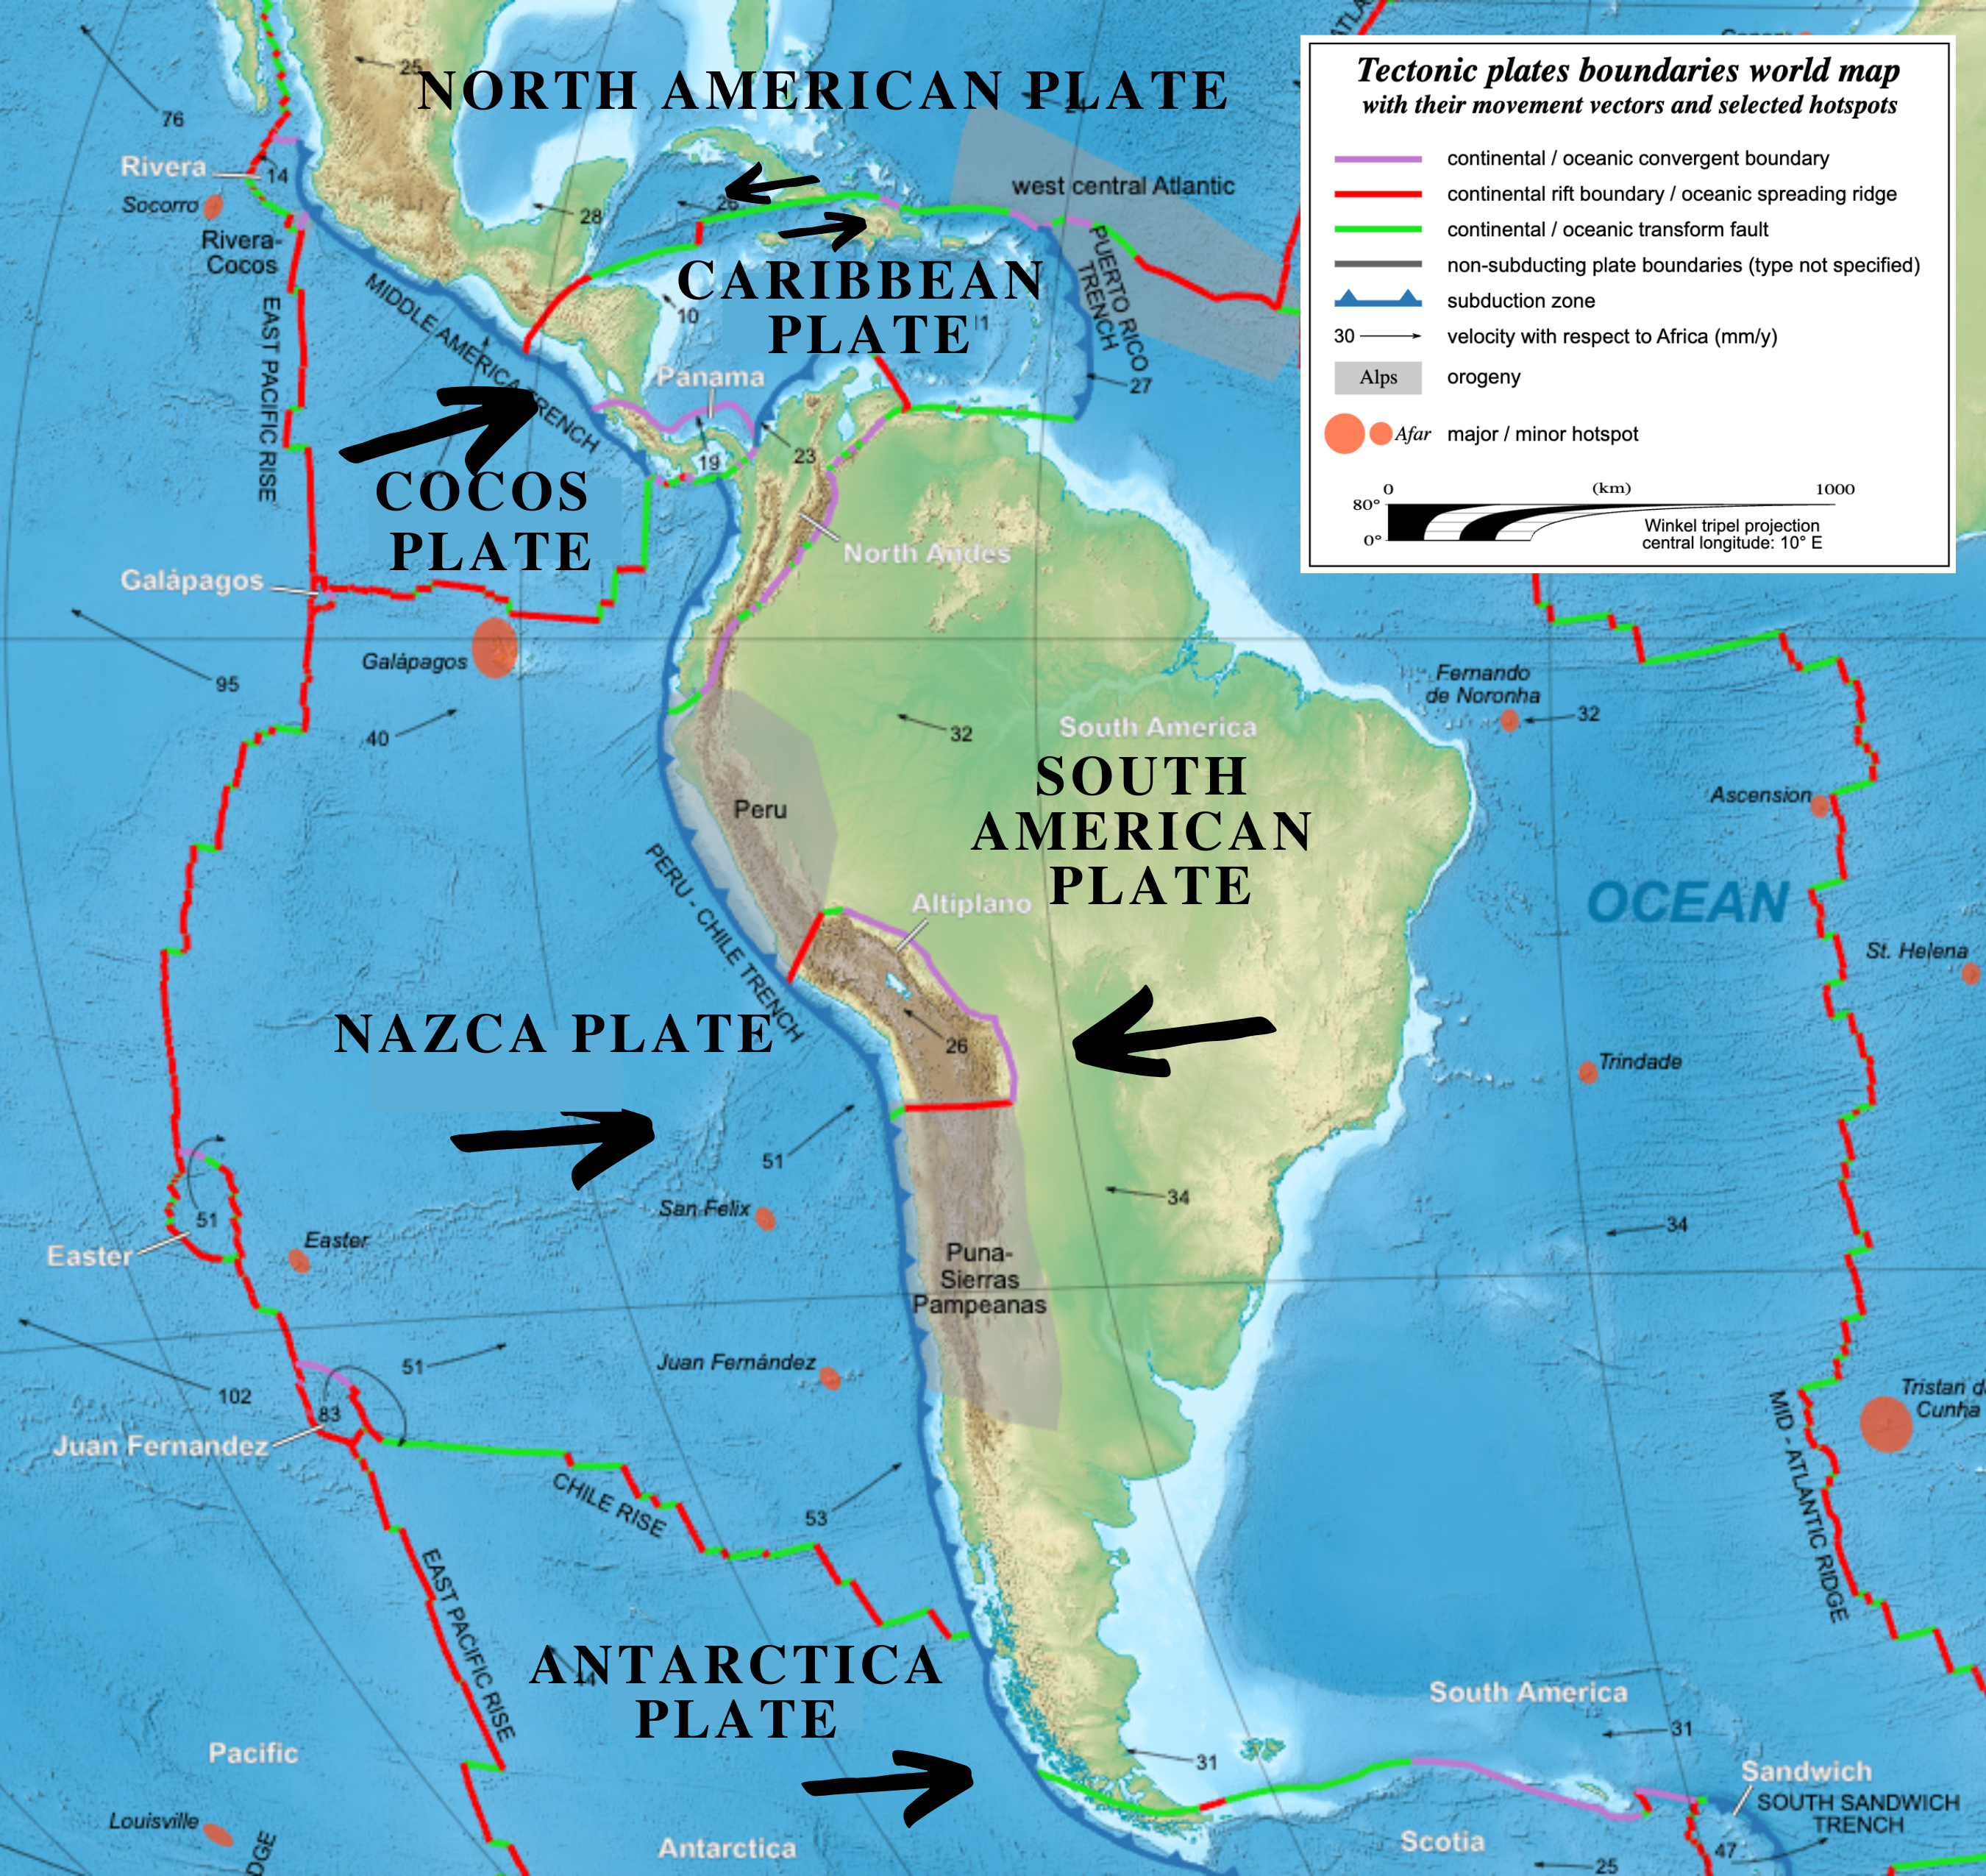 Tectonic plates in Central and South America with arrows showing directions of convergence